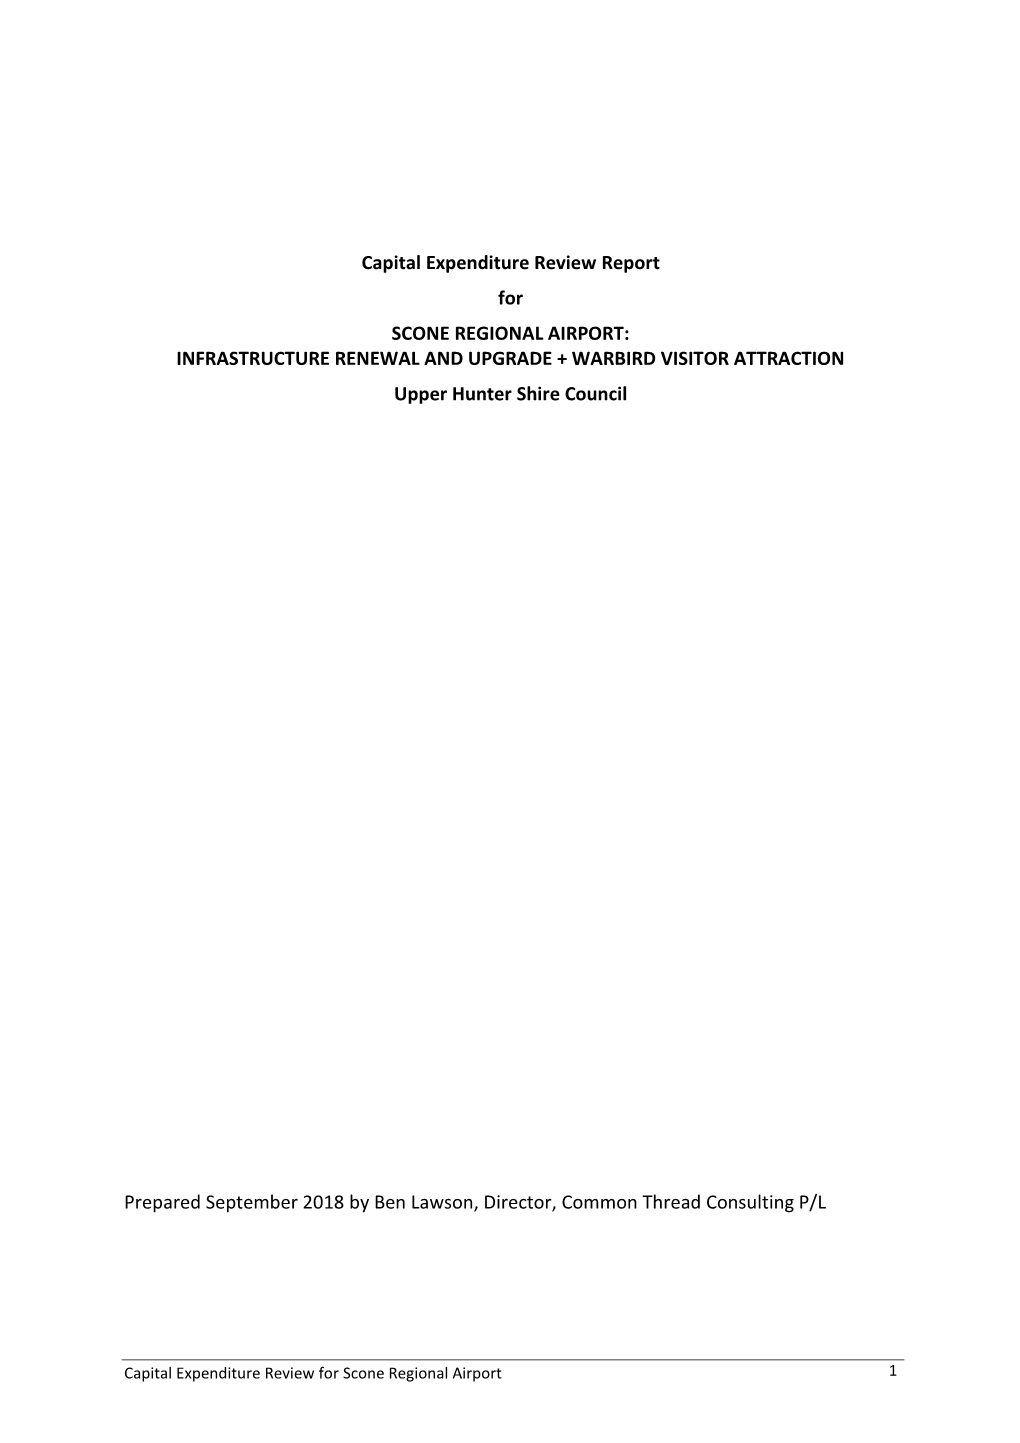 Capital Expenditure Review Report for SCONE REGIONAL AIRPORT: INFRASTRUCTURE RENEWAL and UPGRADE + WARBIRD VISITOR ATTRACTION Upper Hunter Shire Council